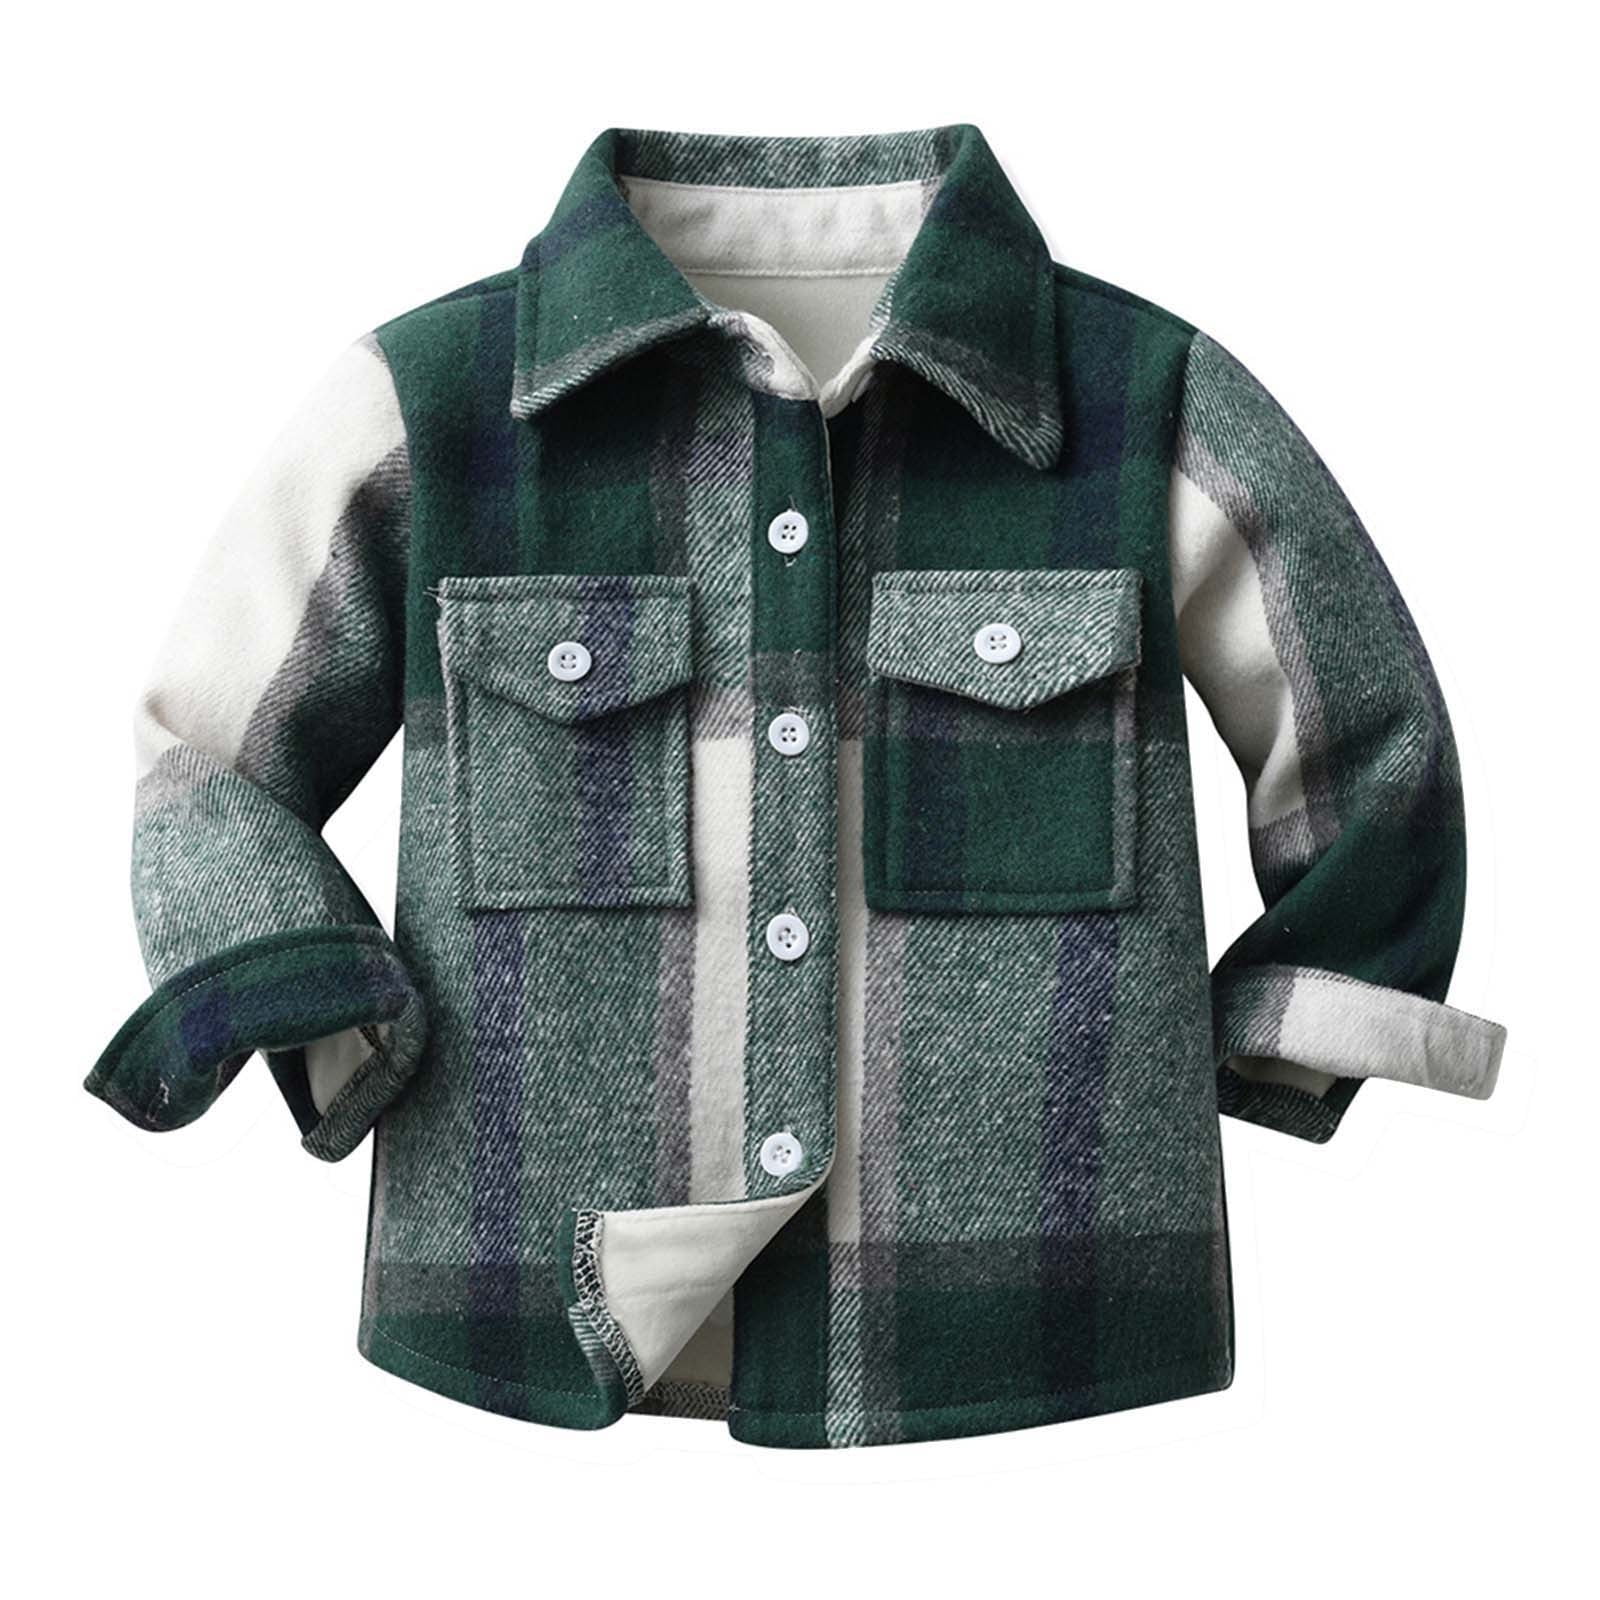 SDJMa Plush And Thicken Toddler Flannel Shirt Jacket Plaid Long Sleeve  Lapel Button Down Shacket Kids Boys Girls Shirts Coats Fall Tops